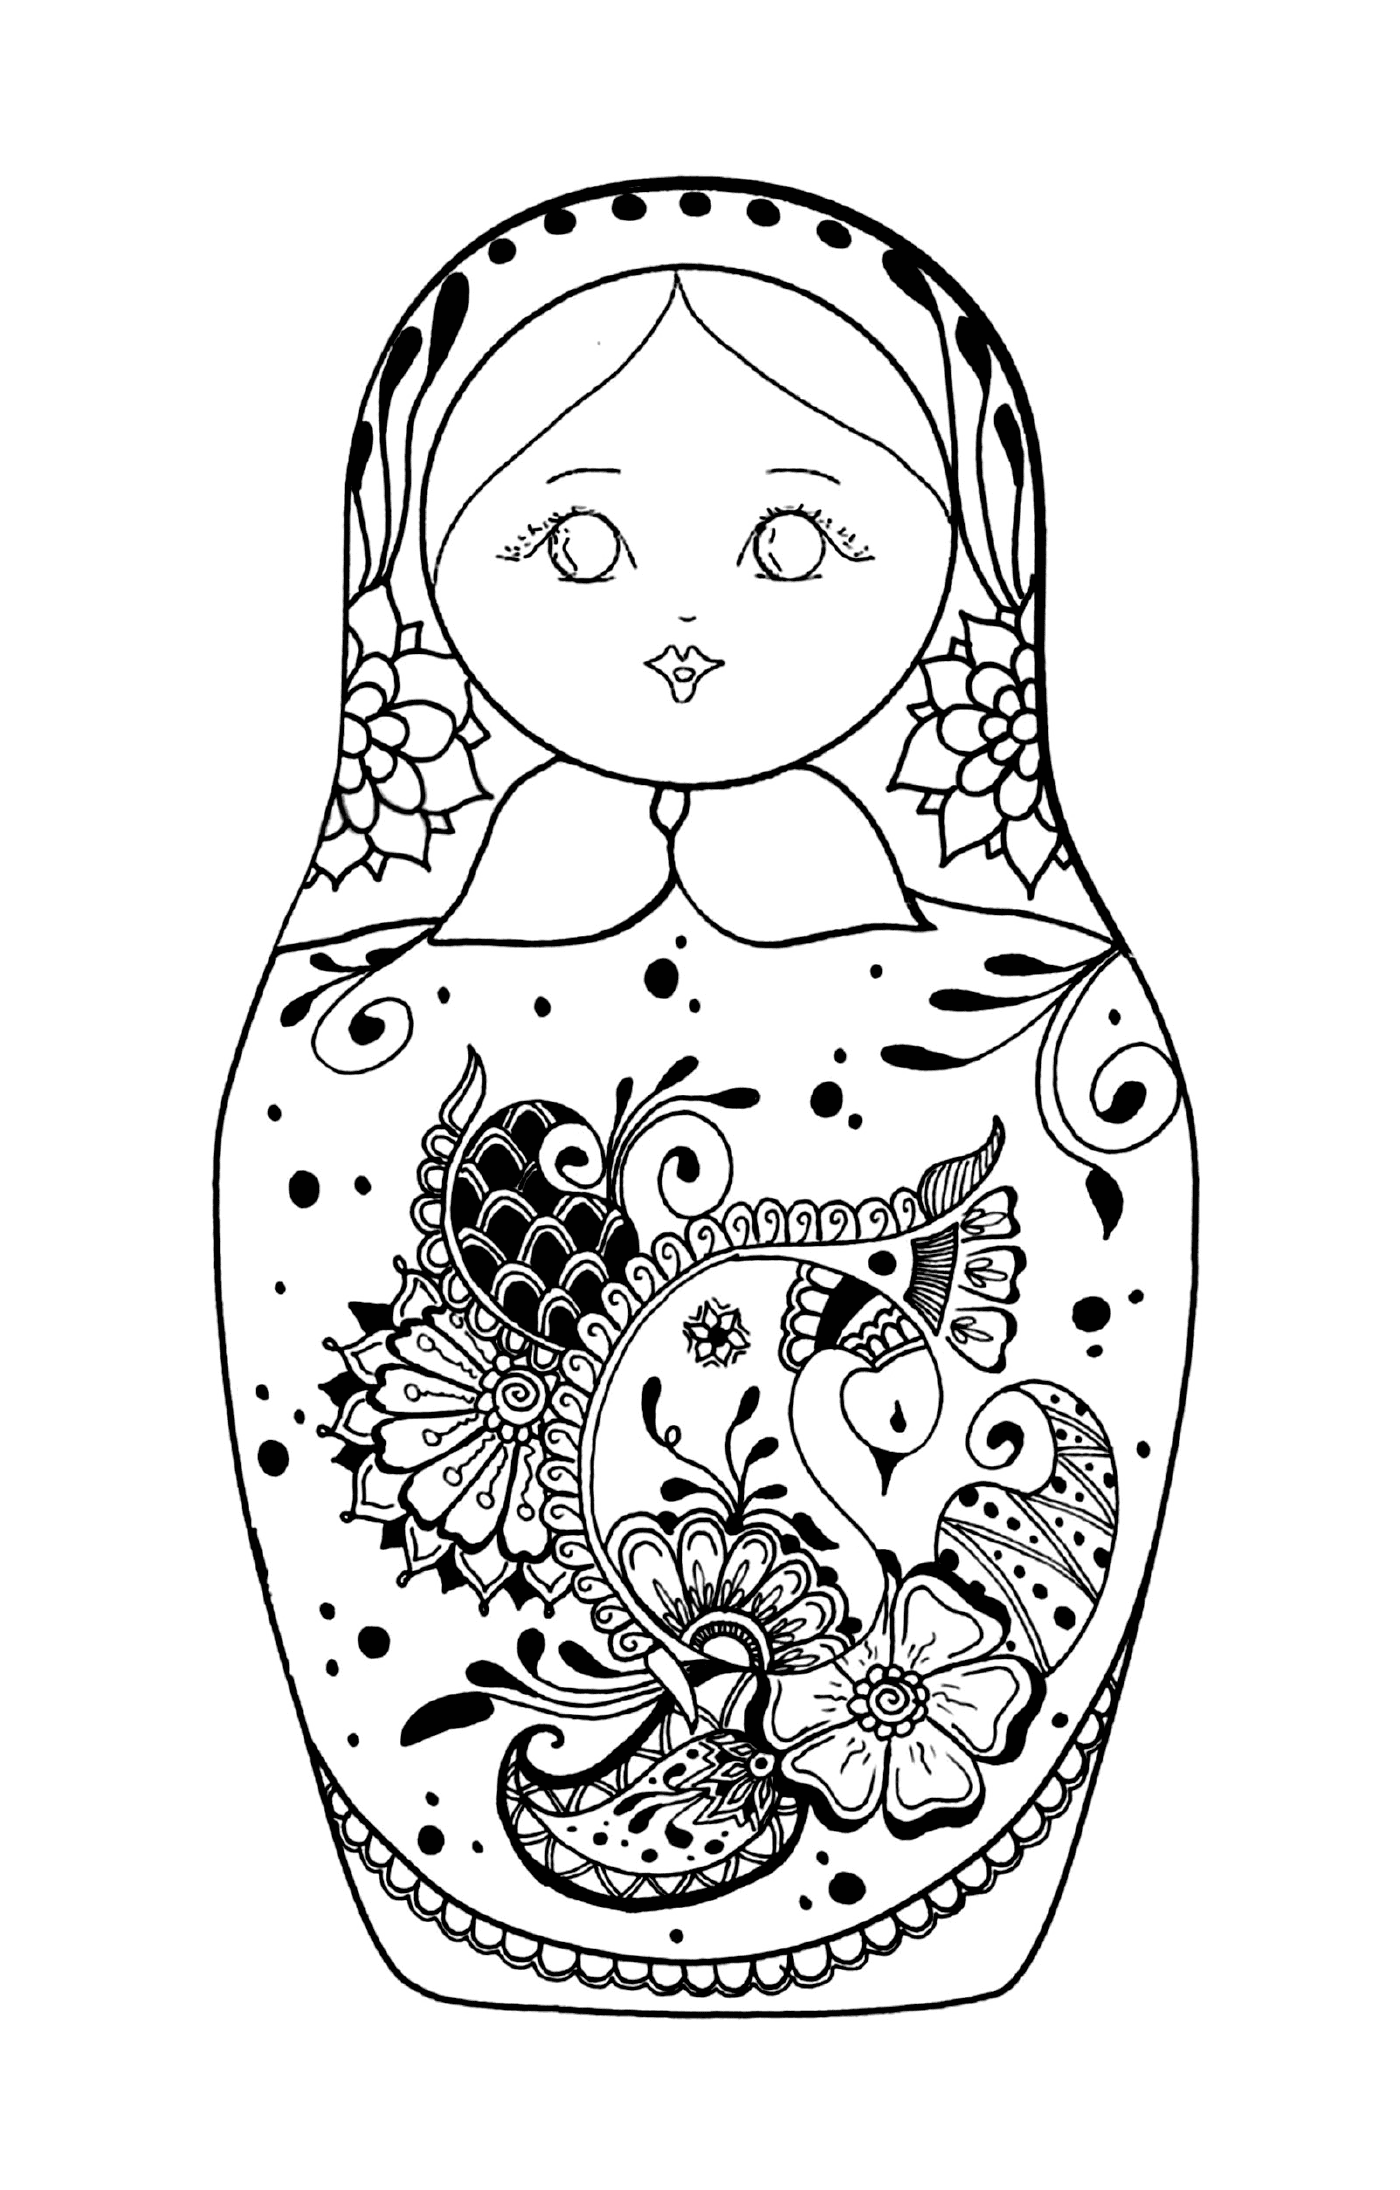  Russian doll baby adorable 